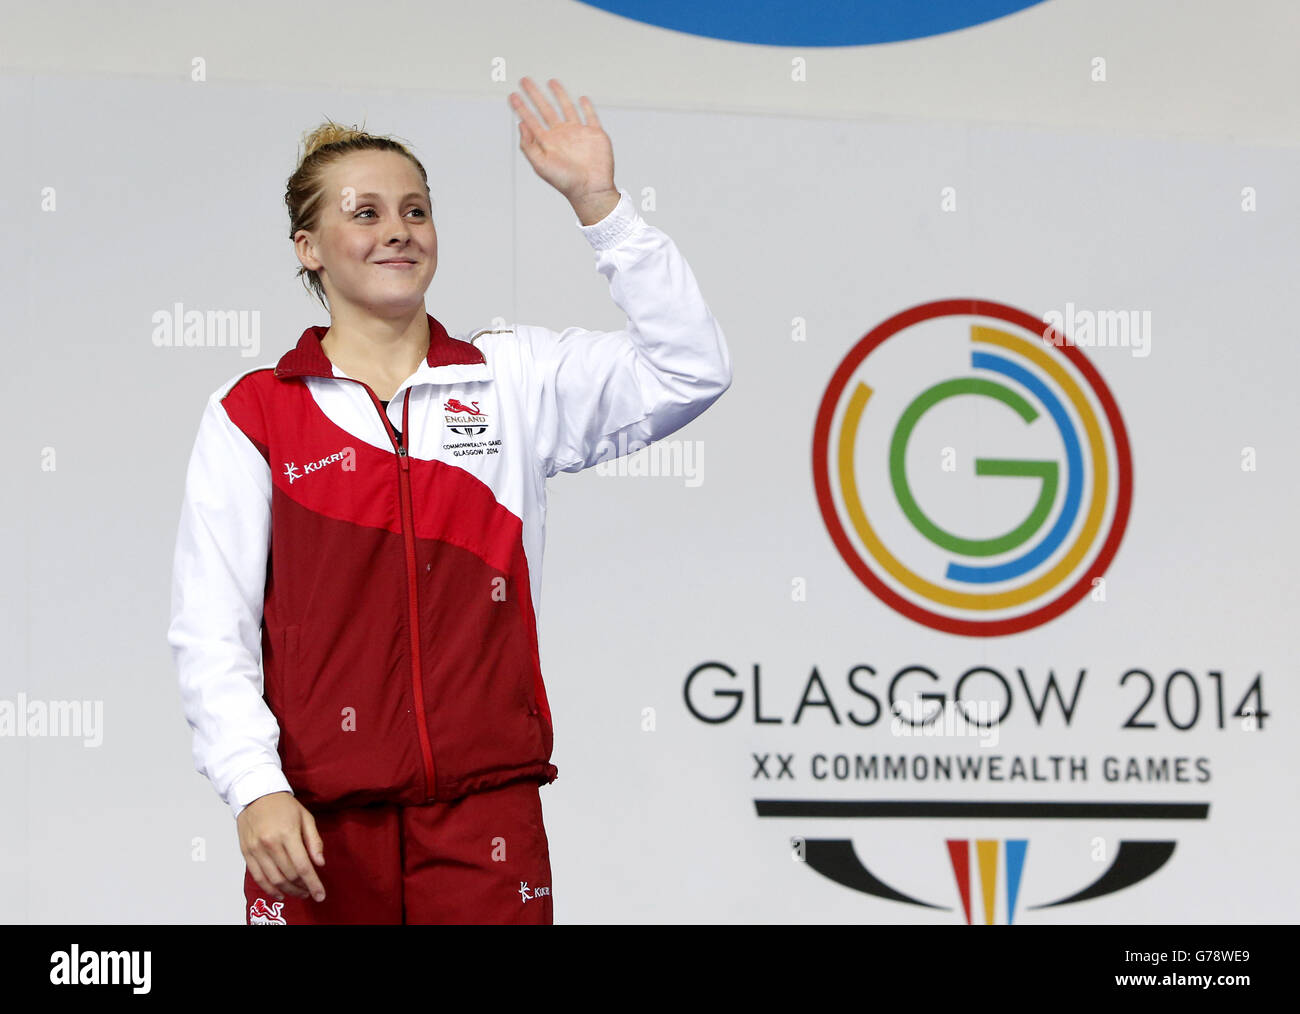 England's Siobhan O'Connor with her gold medal for the Women's 200m Individual Medley Final, at Tollcross Swimming Centre, during the 2014 Commonwealth Games in Glasgow. Stock Photo